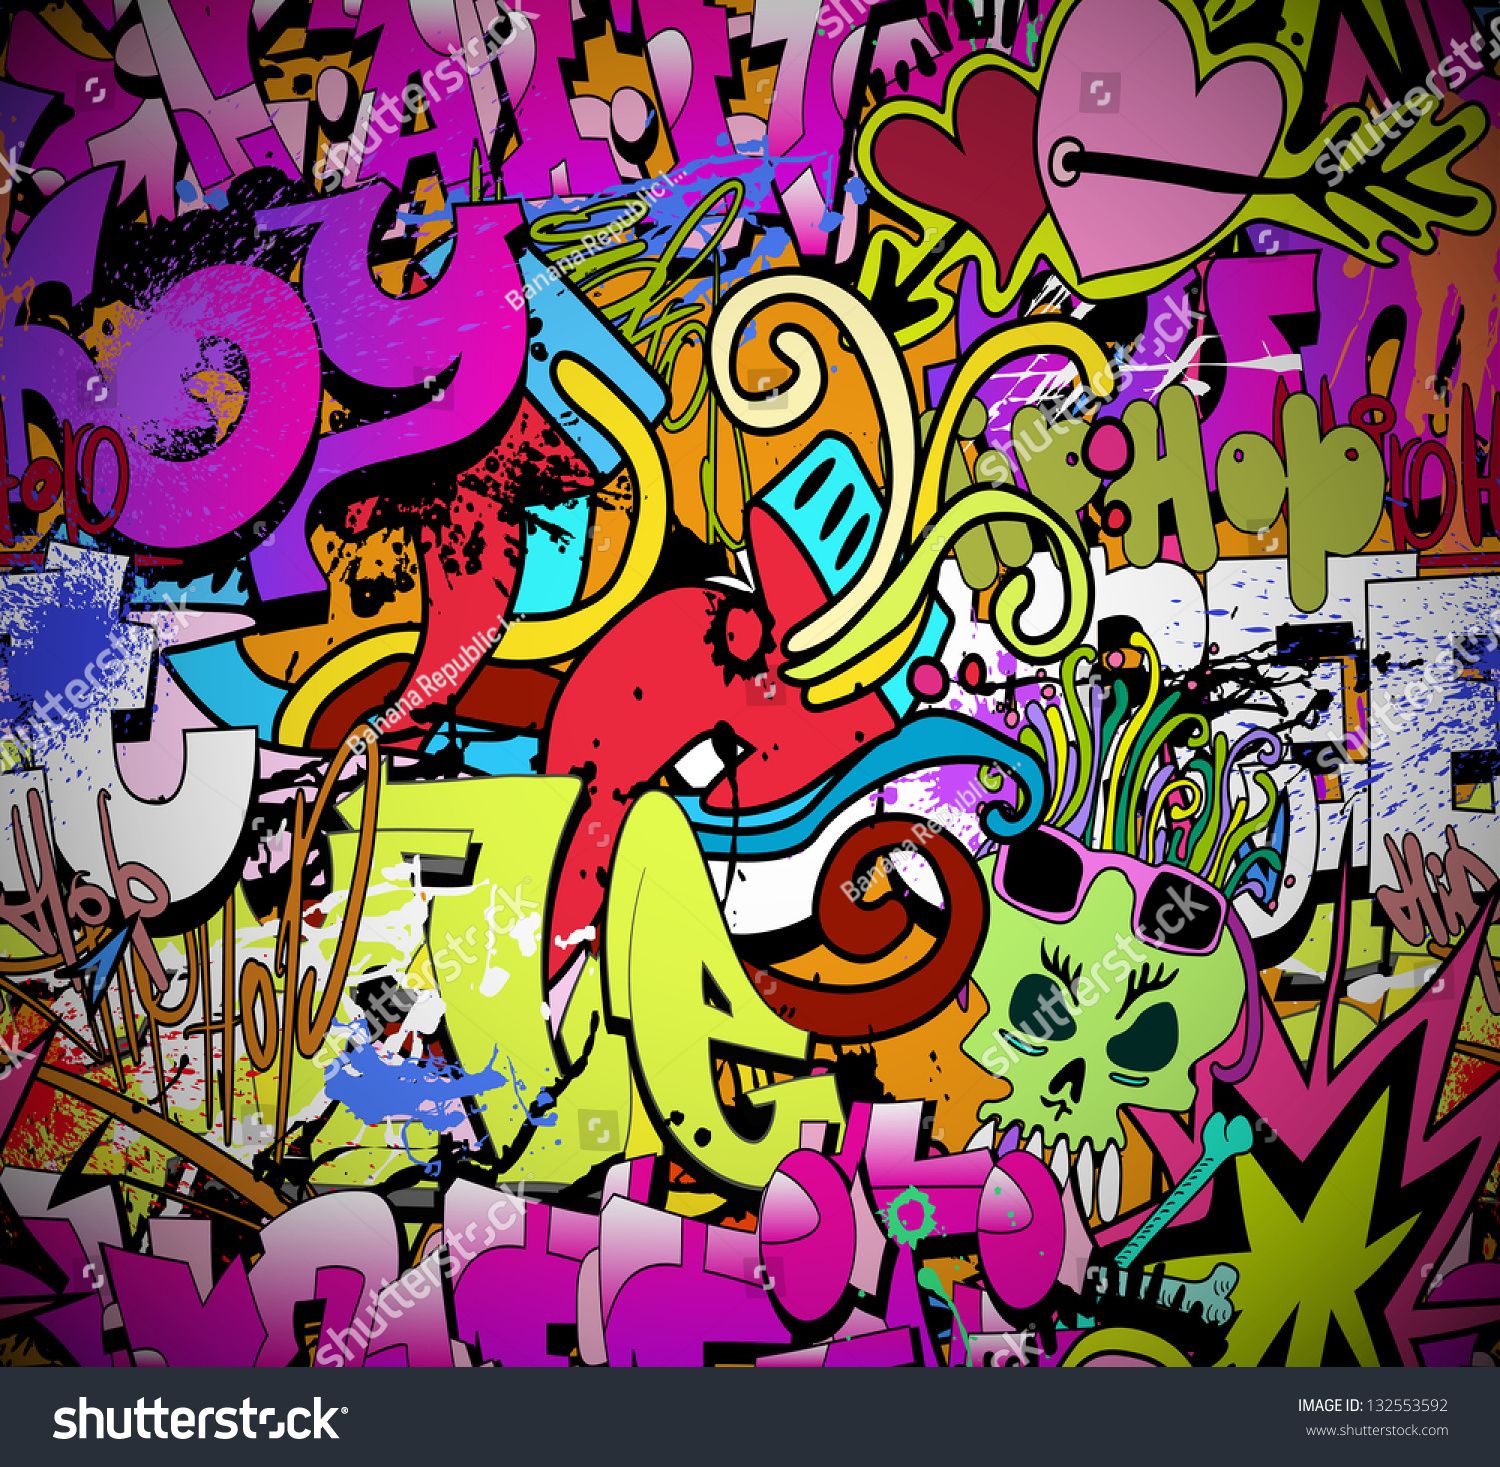 Graffiti Wall Art Background Hiphop Style Stock Illustration 132553610 |  Shutterstock Throughout Hip Hop Design Wall Art (View 6 of 15)